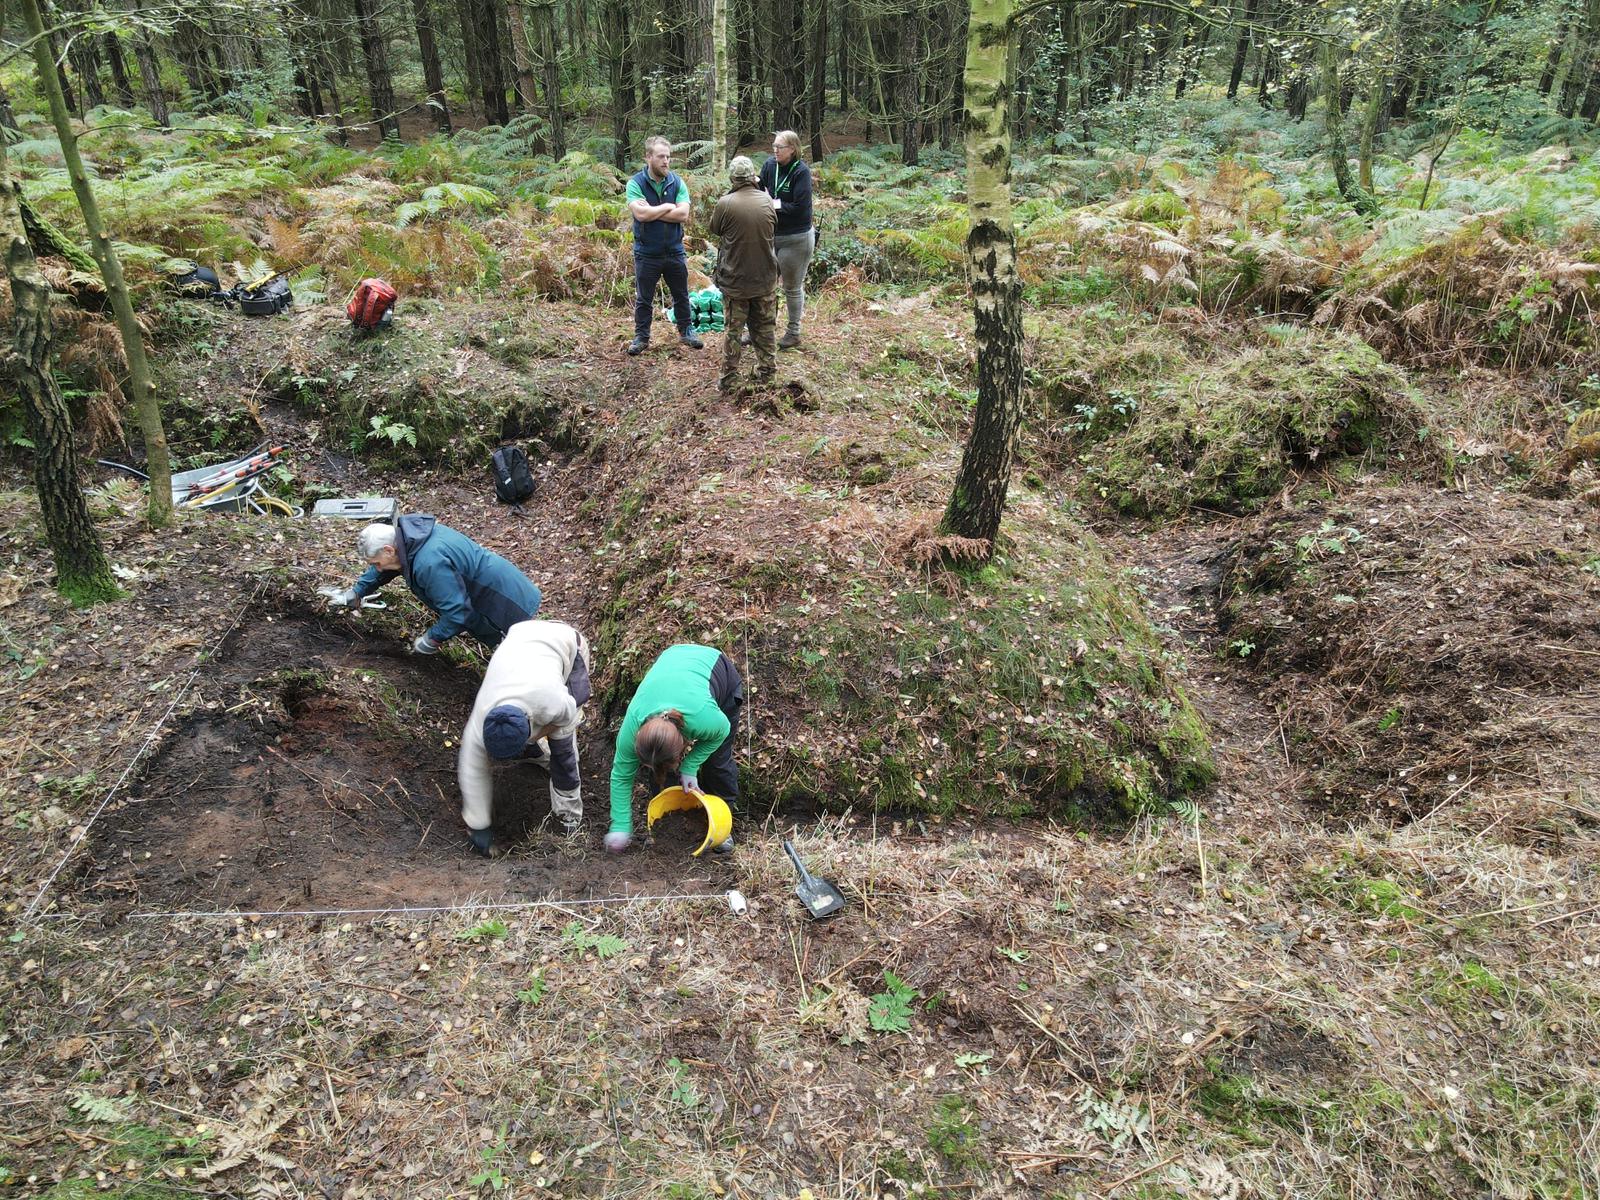 Photograph of a group excavating Sherwood Pines